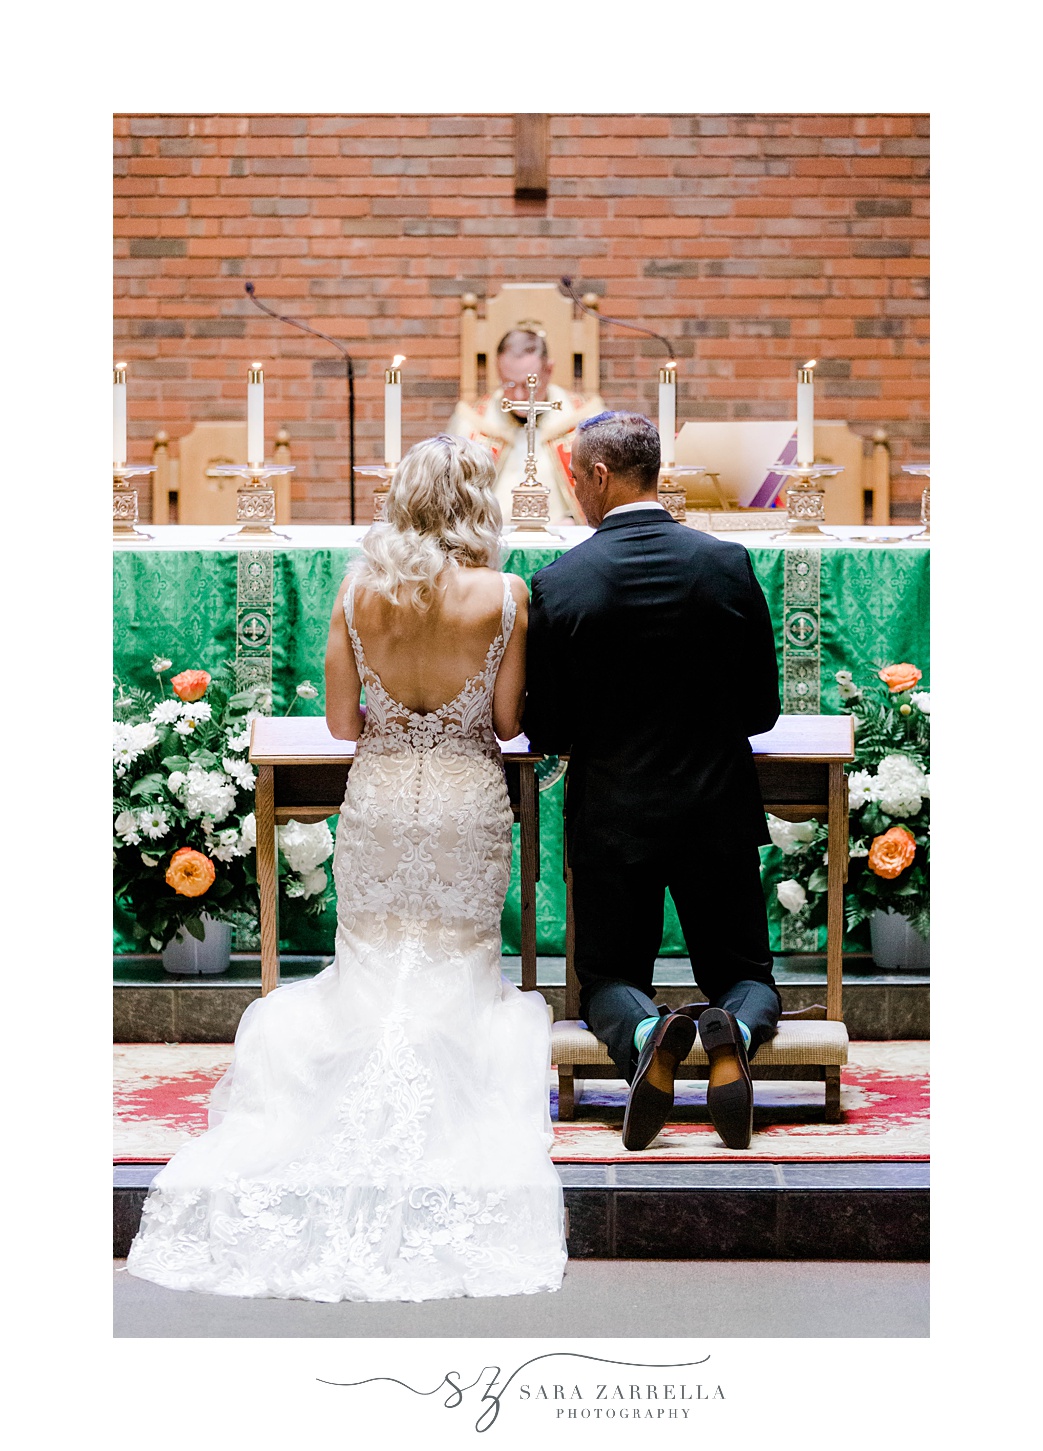 newlyweds kneel at alter during traditional church wedding in Sutton MA